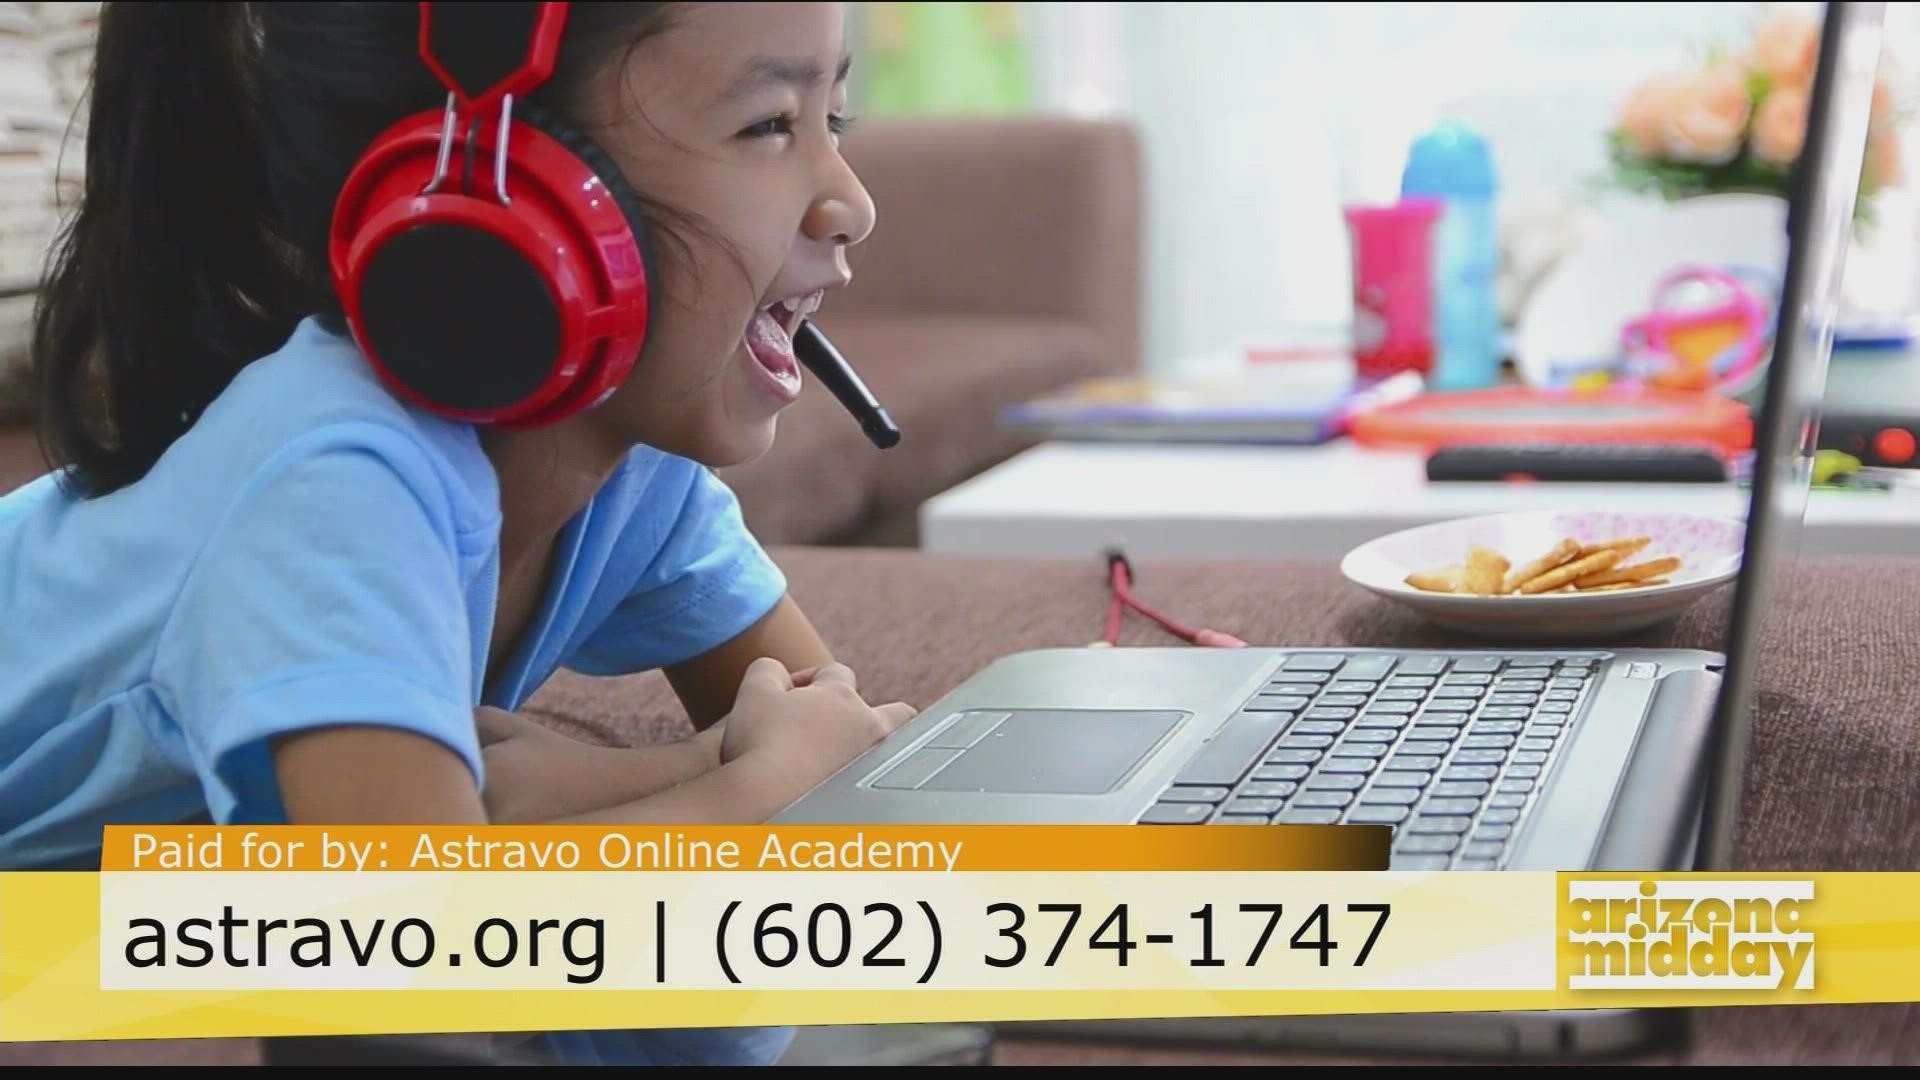 Astravo Online Academy: Another option for Parents 12news com